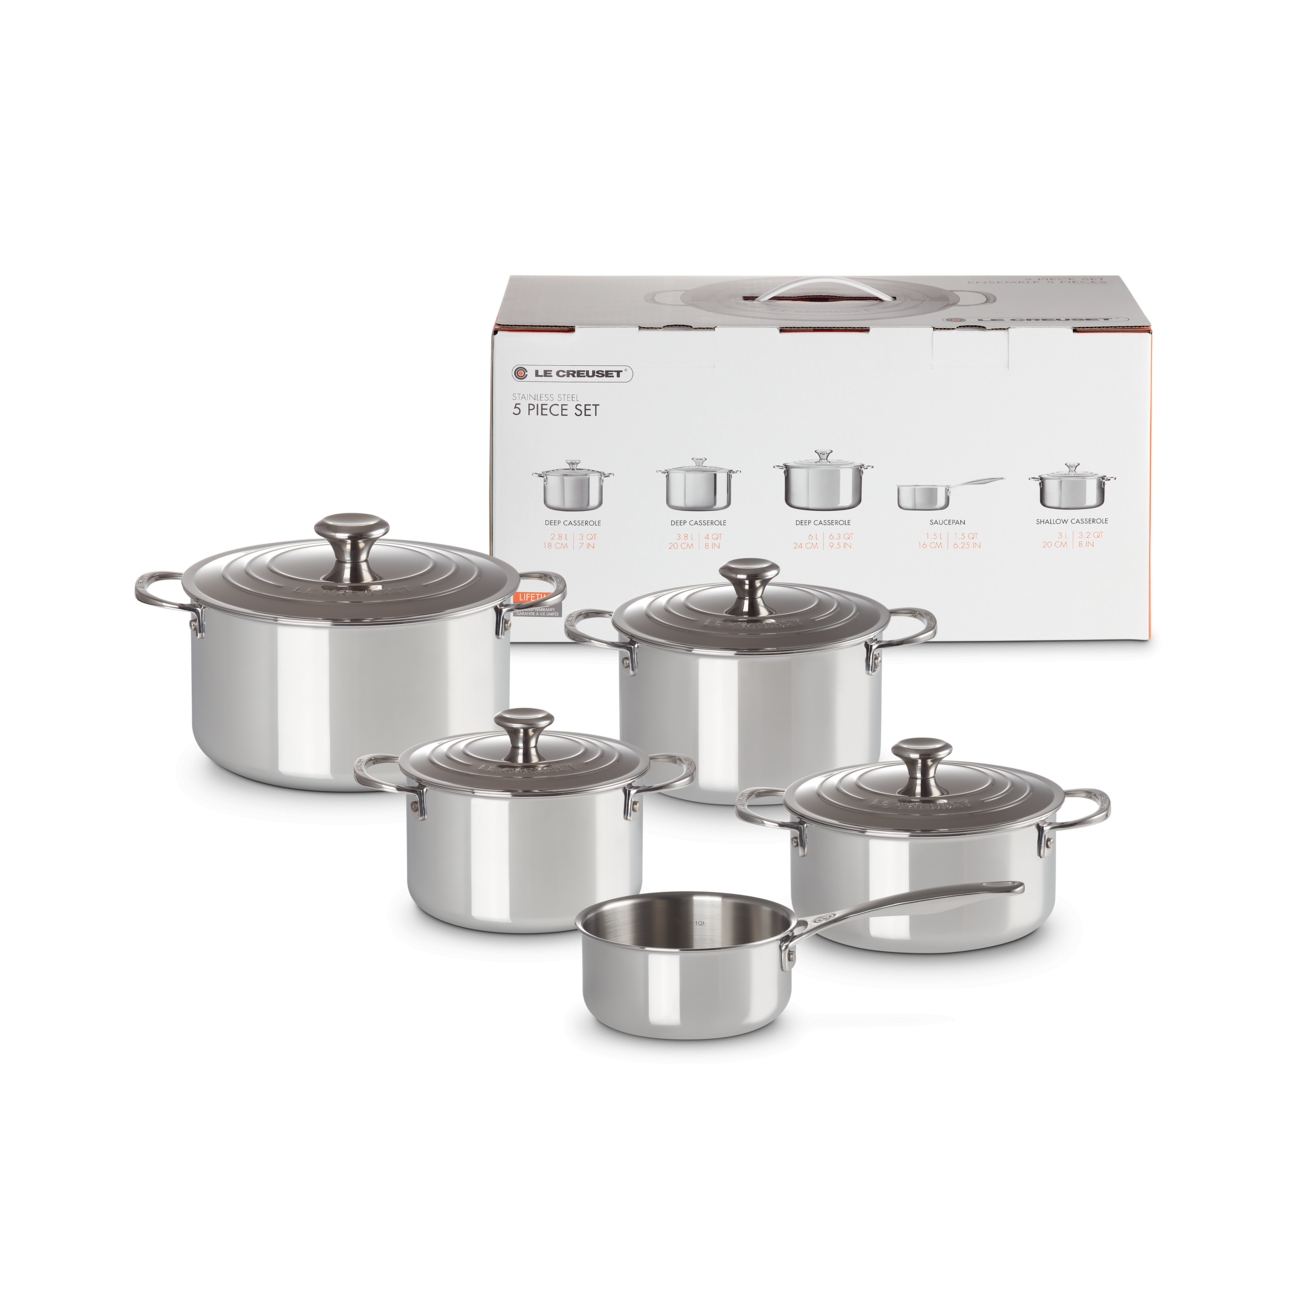 Le Creuset Stainless Steel 5